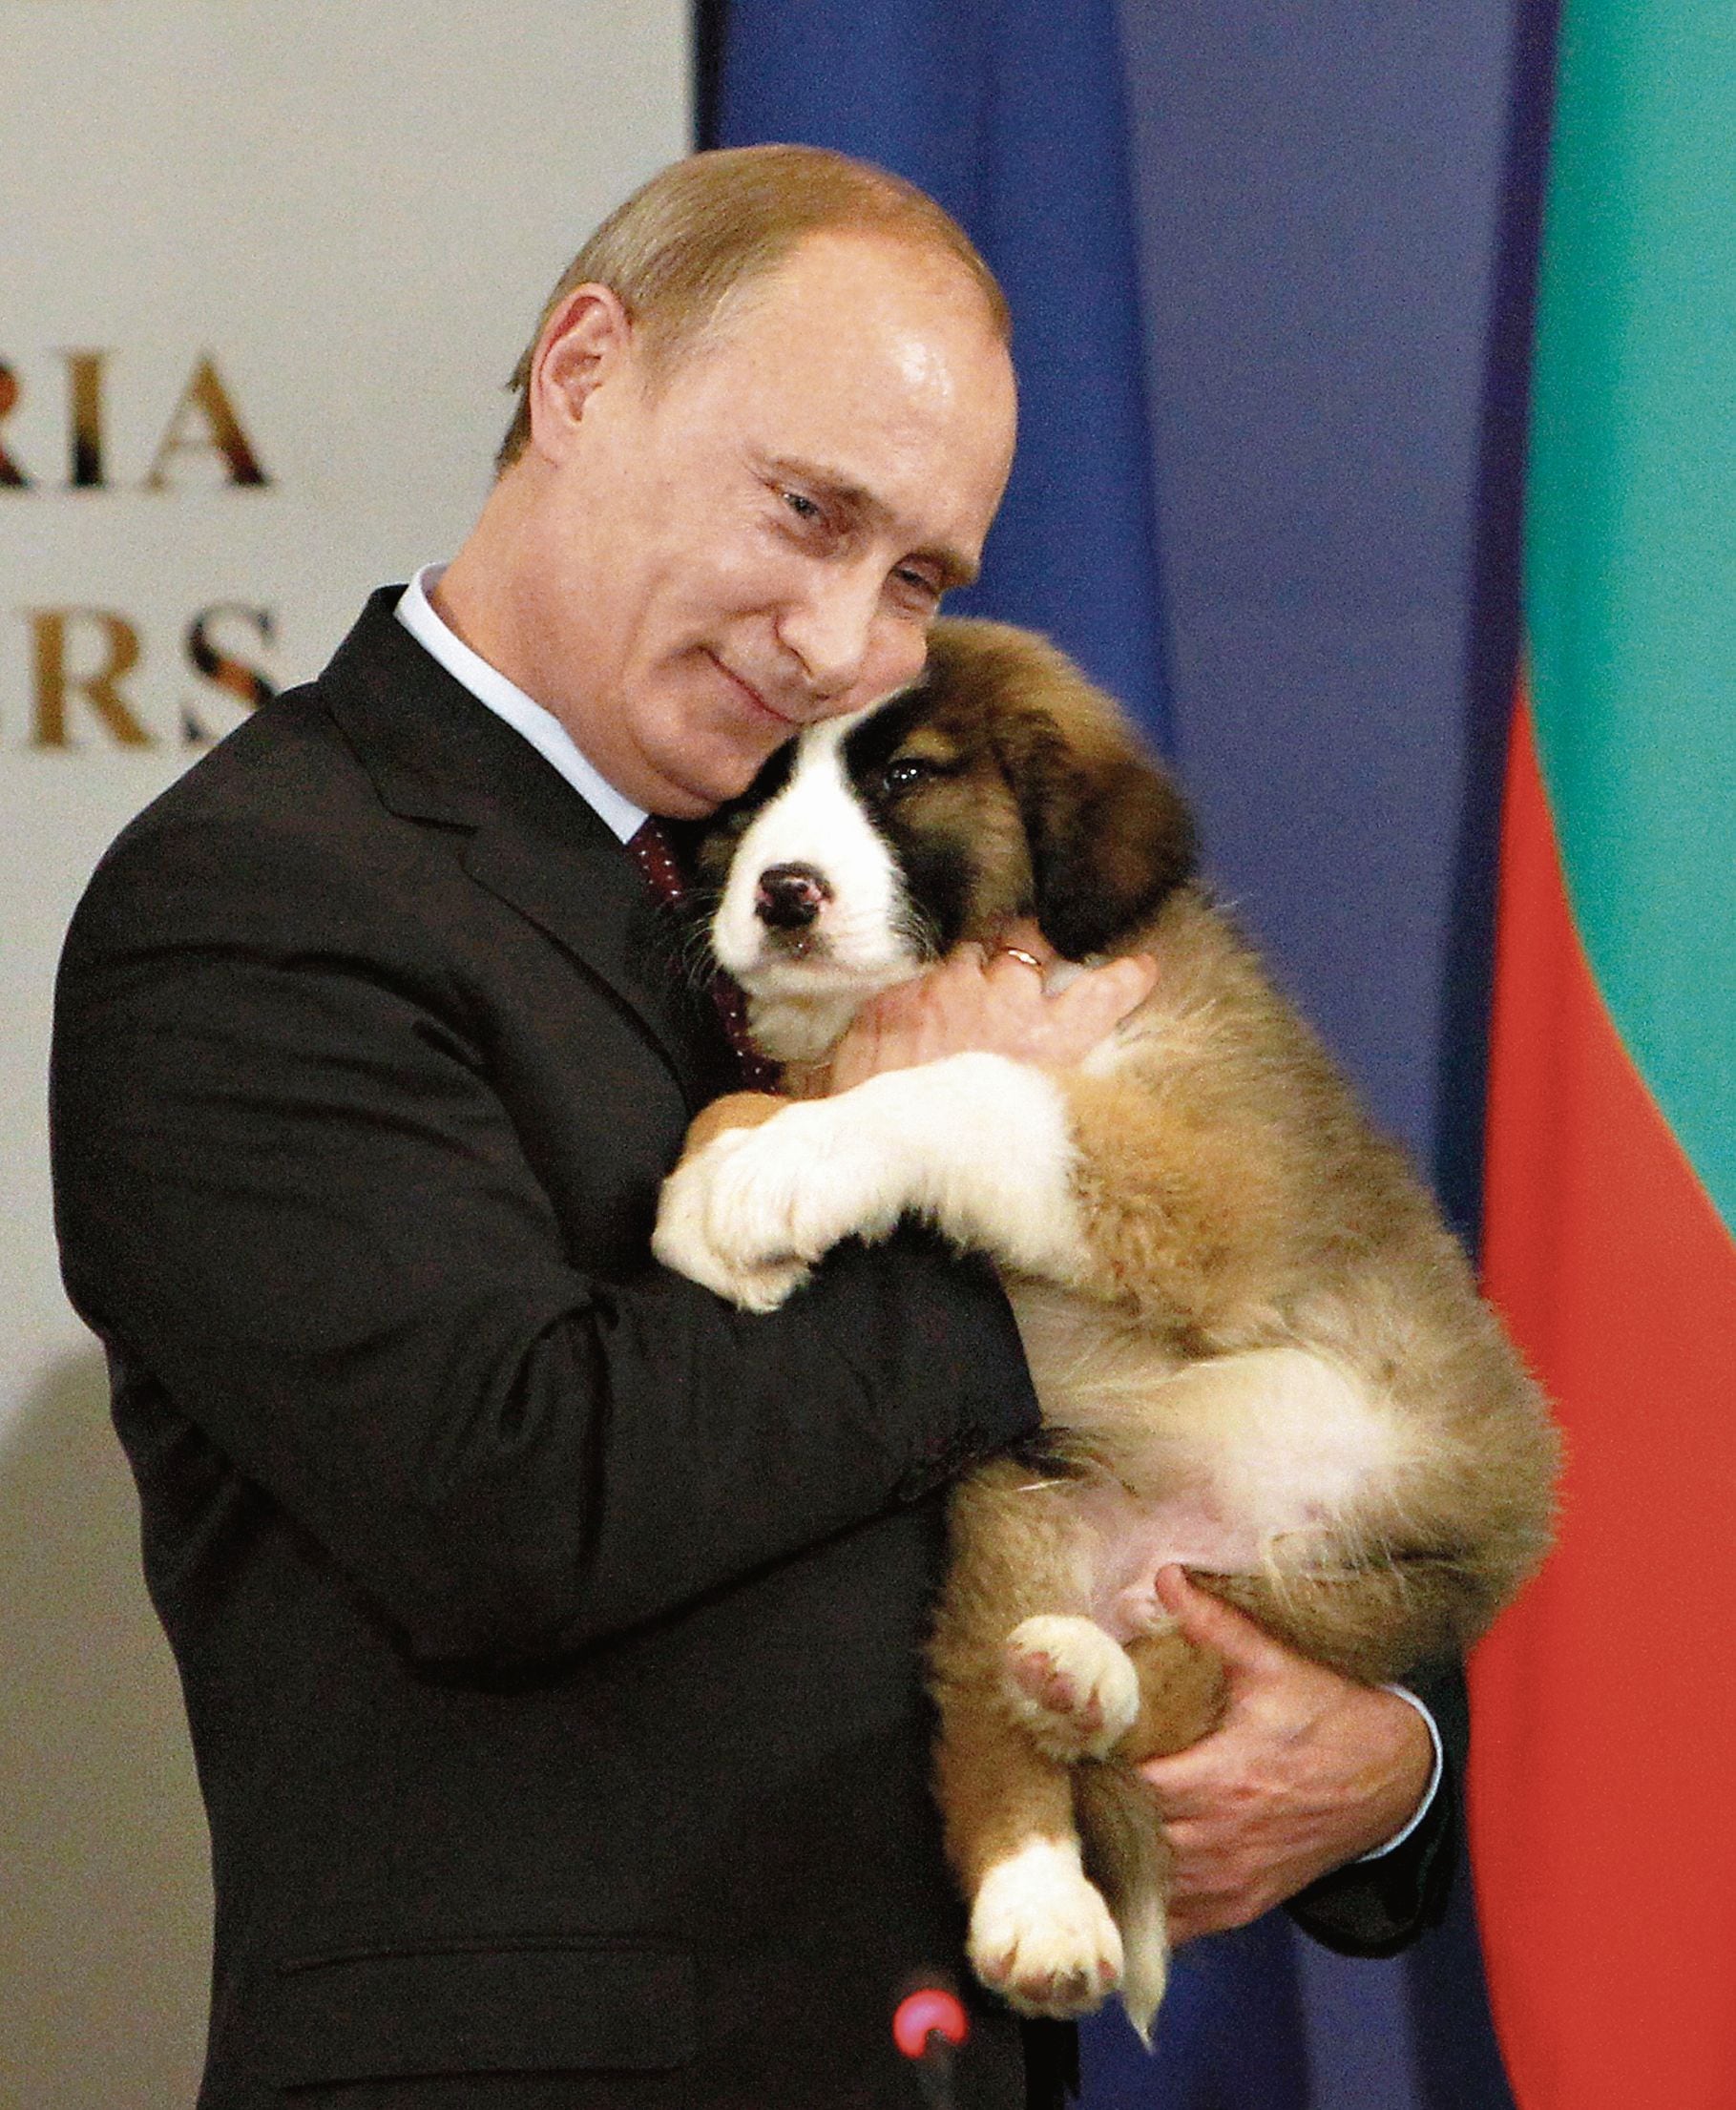 This iconic photo is from the days when Putin was prime minister.  In November 2010, he received a Bulgarian Shepherd puppy as a gift from his Bulgarian counterpart Boiko Borisov.  (Photo: Reuters)